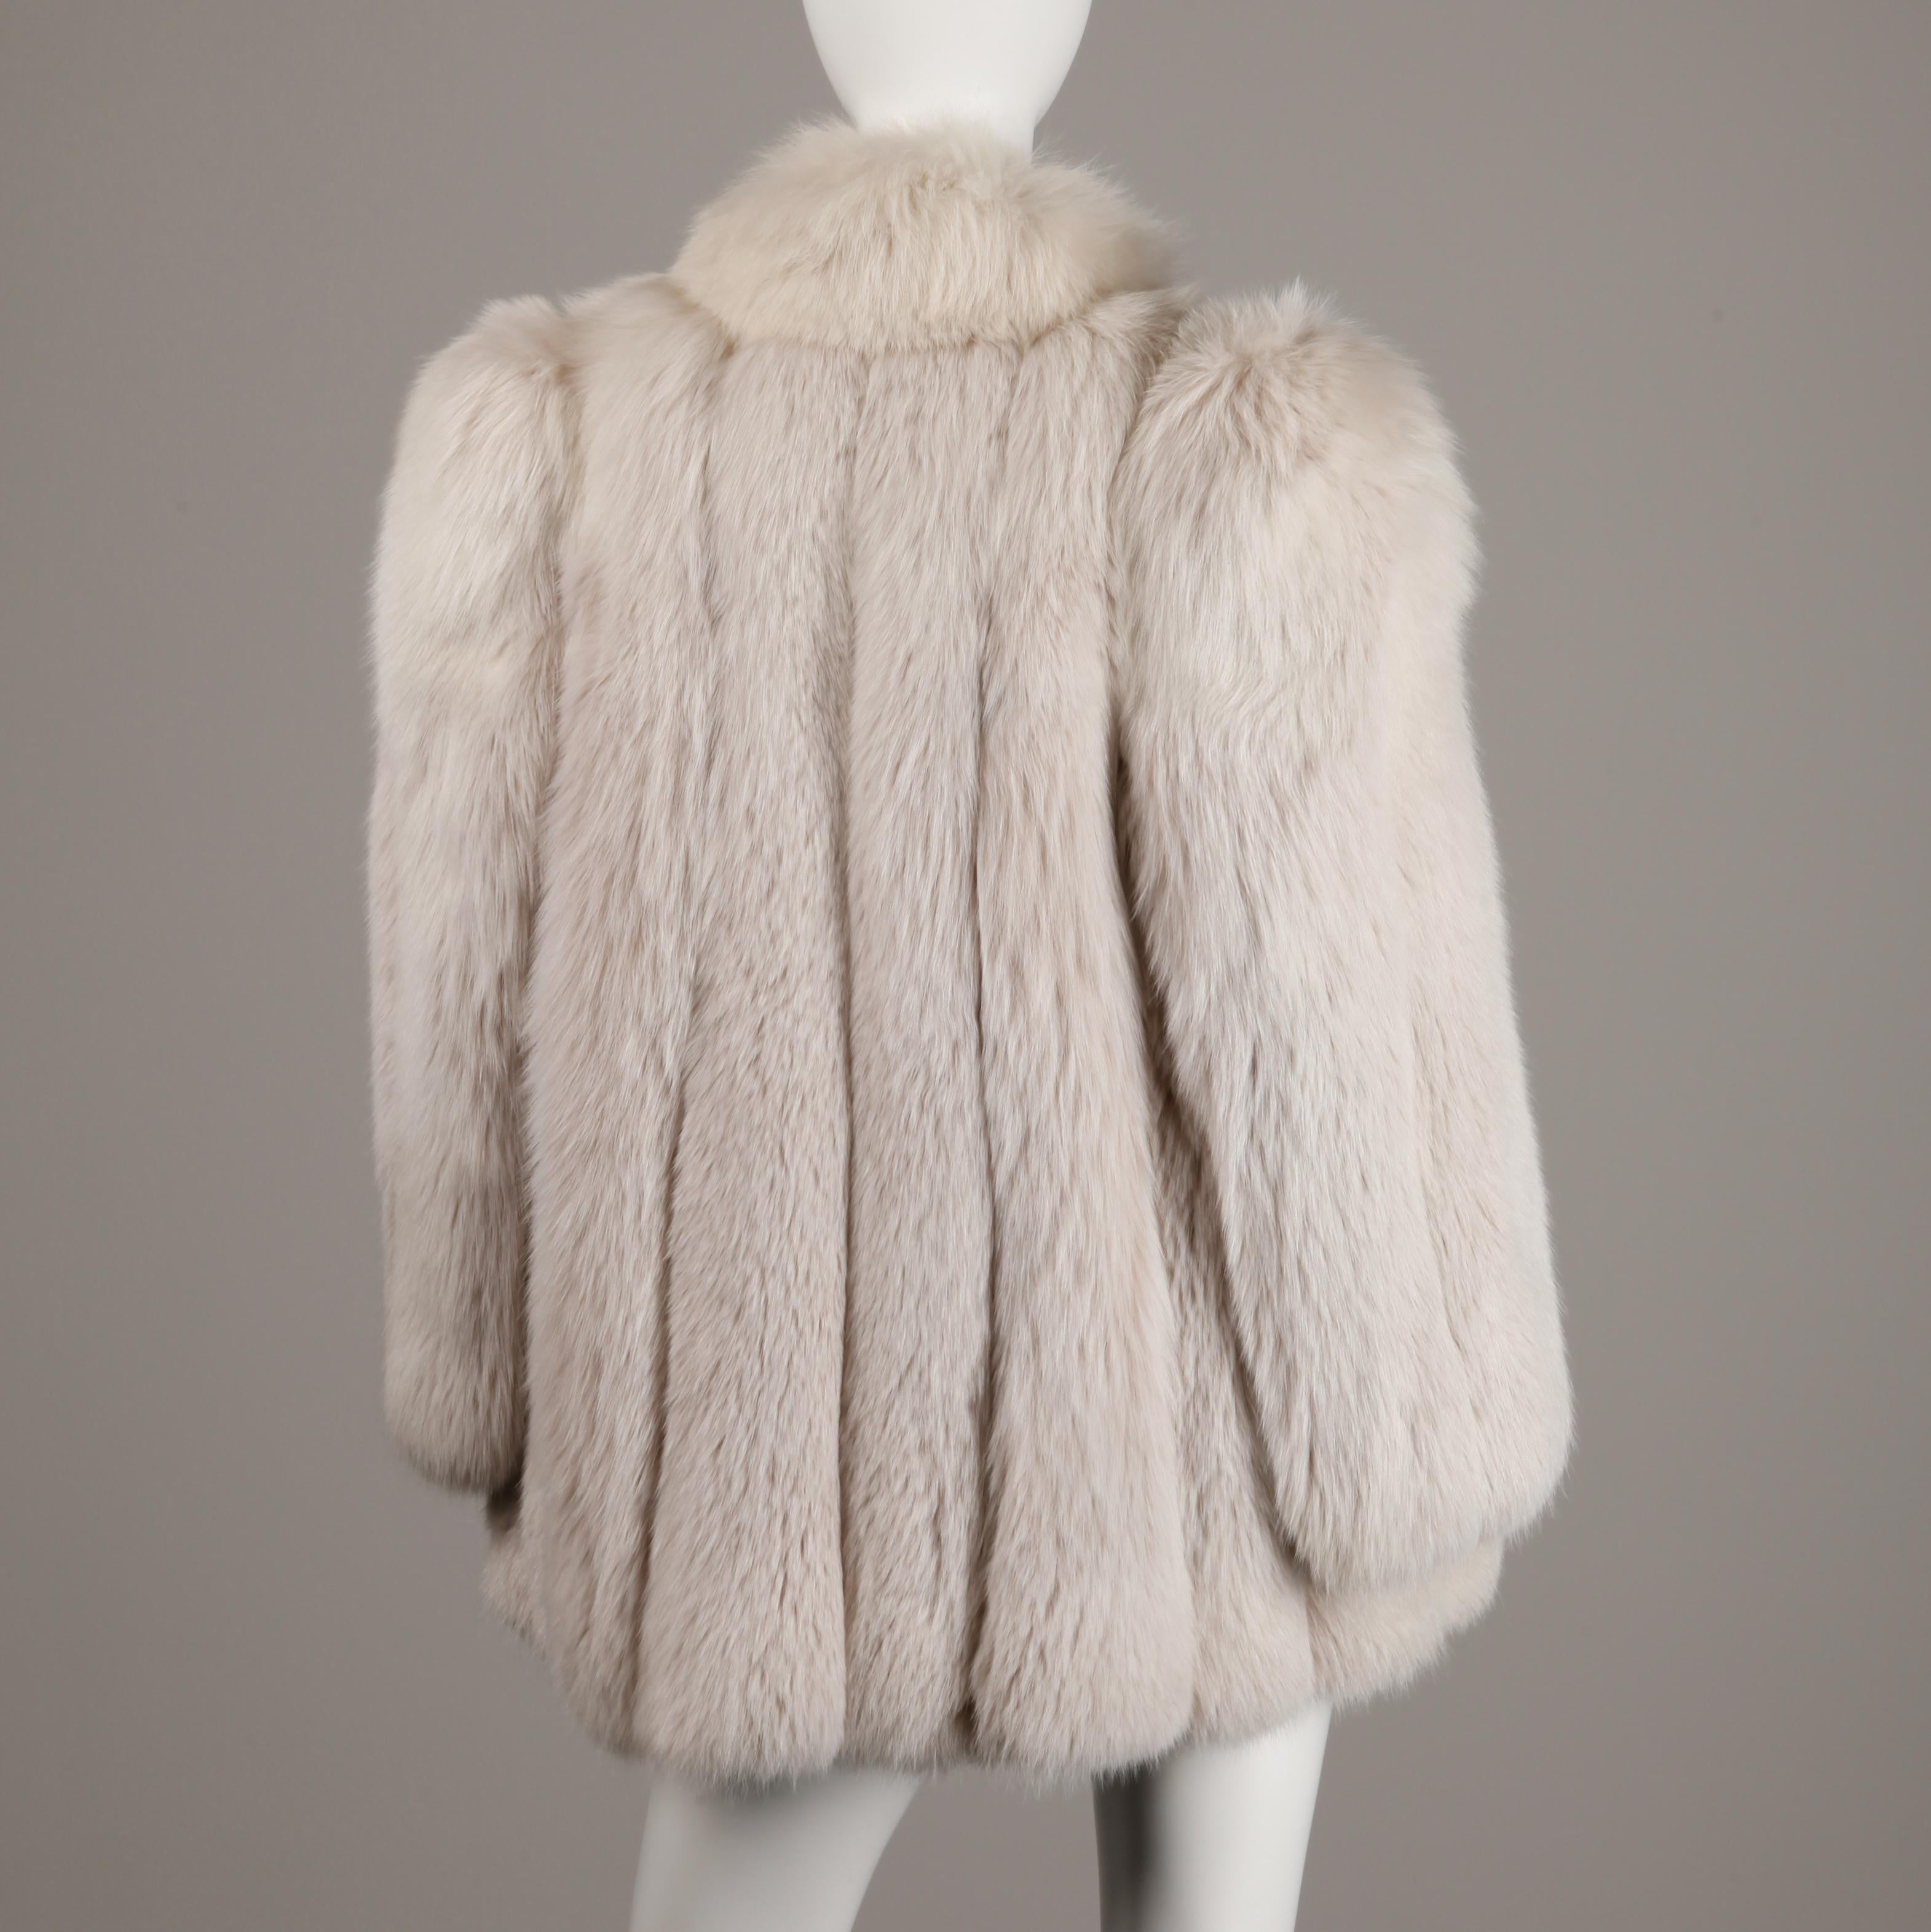 Beautiful quality vintage Arctic fox fur coat or jacket from the estate of Pamela Lewis (Jerry Lewis, Gary Lewis). Fully lined with front hook closure and velvet lined side pockets. This is nicer in person than it looks in the photos. Fits like a